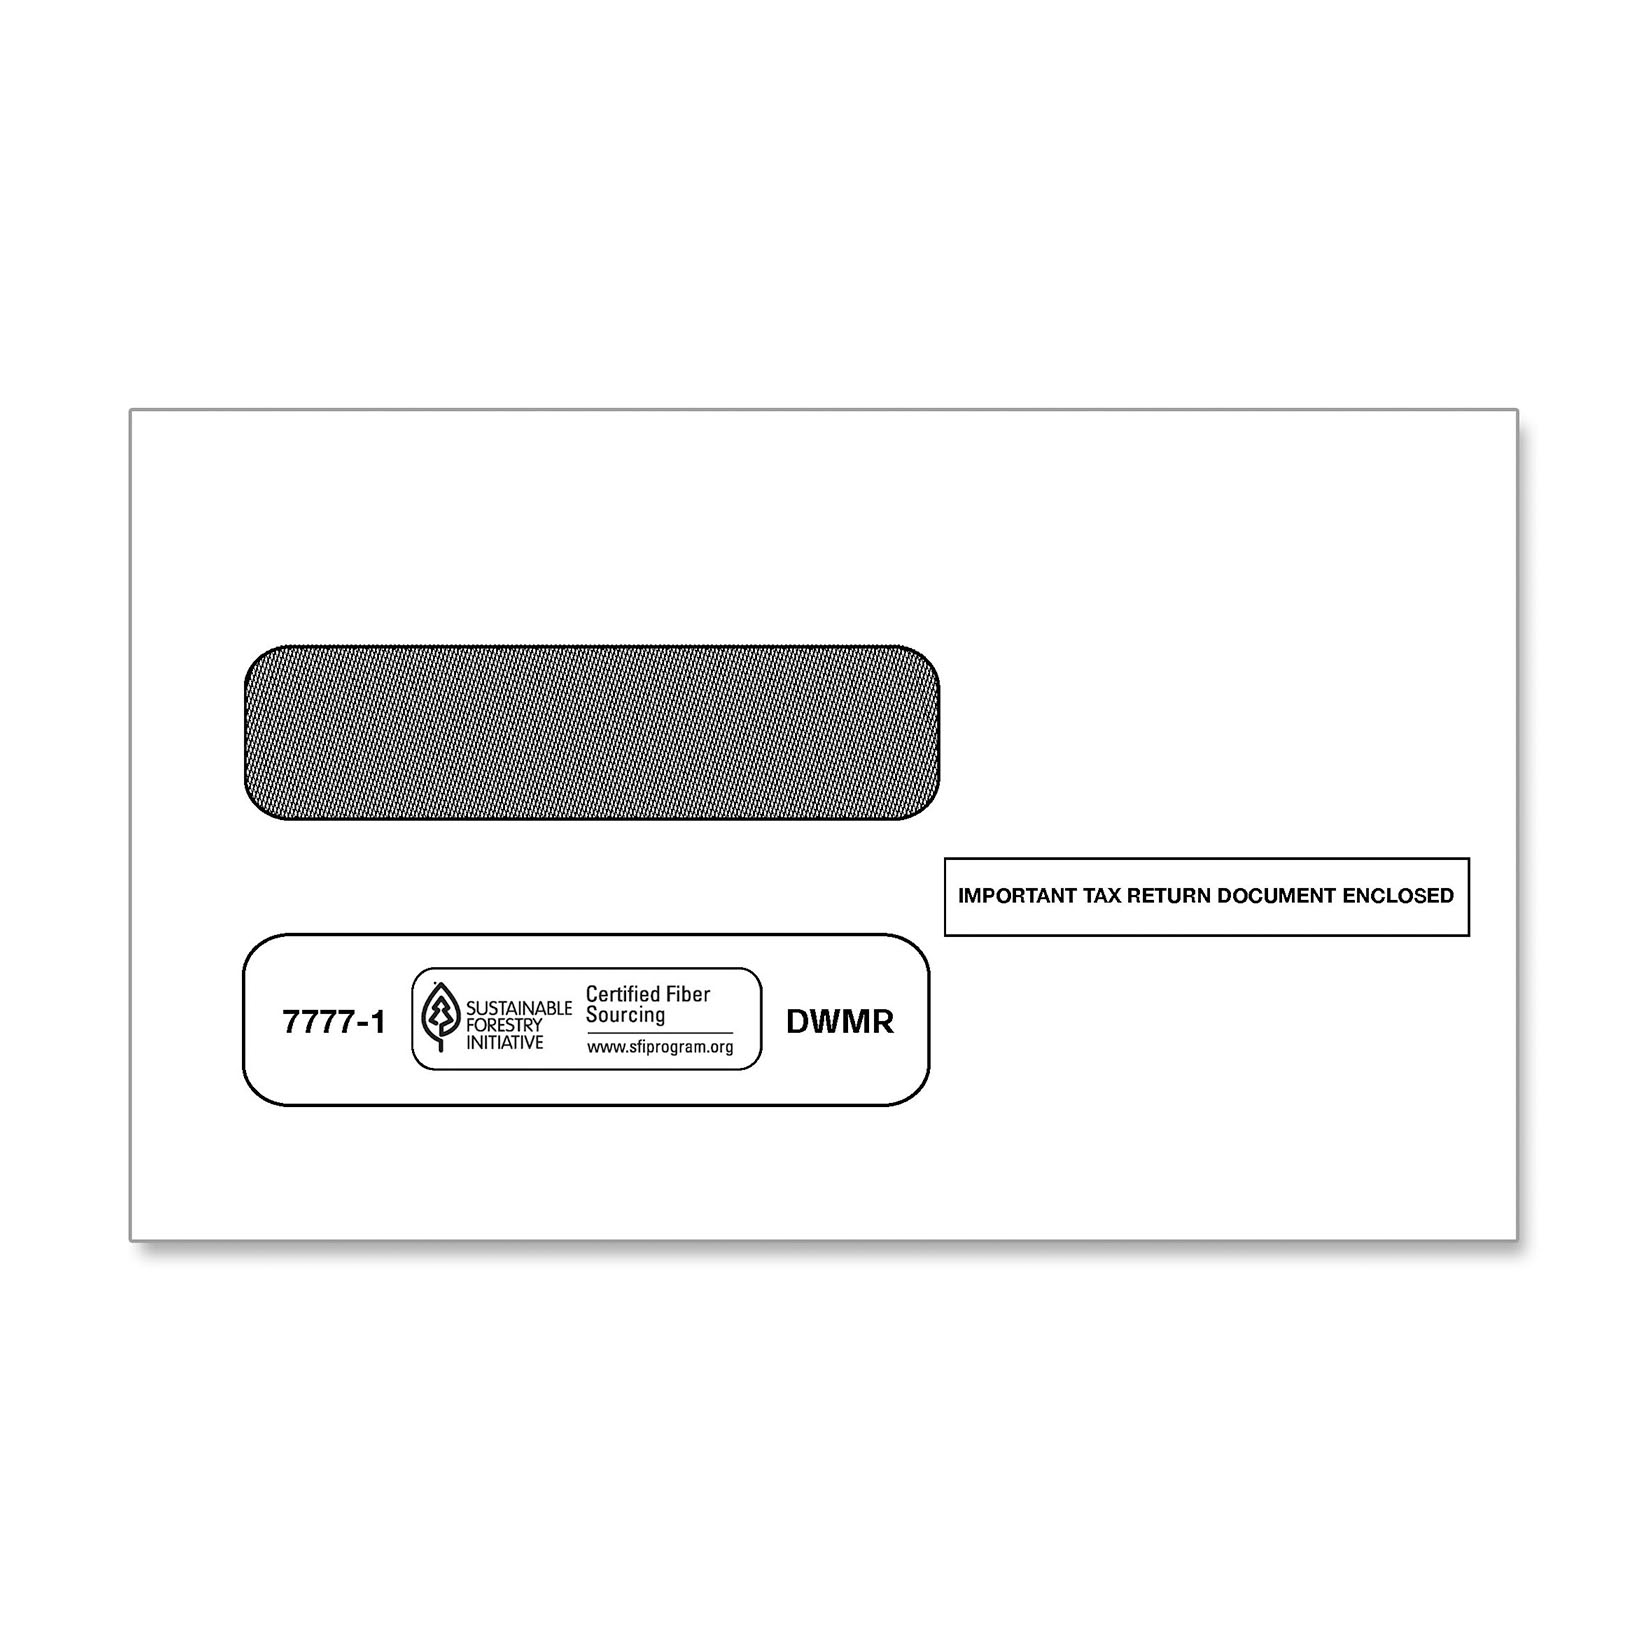 Double Window Envelope for 2-Up 1099s #7777